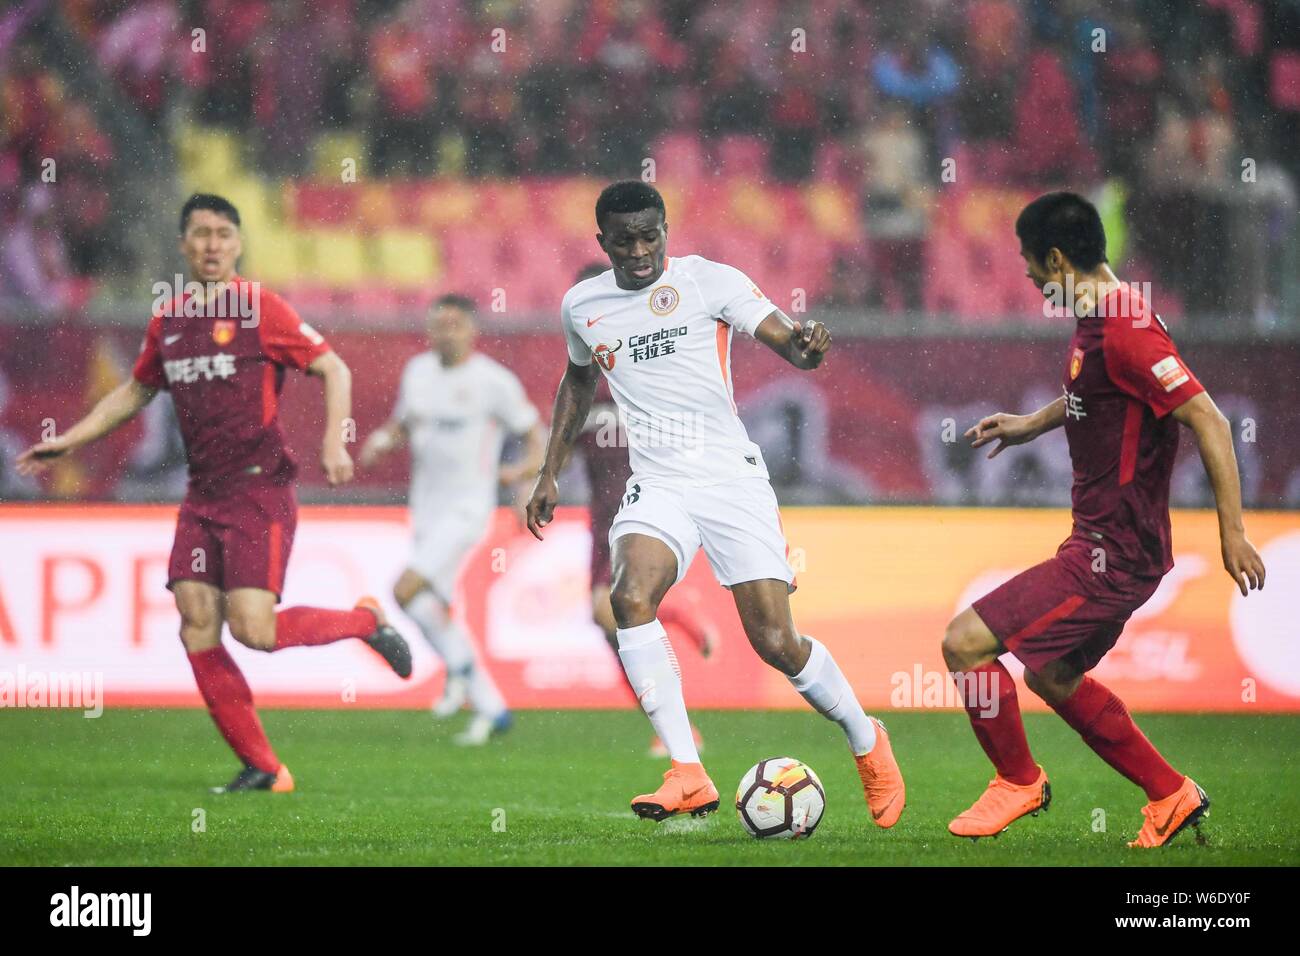 Cameroonian football player Benjamin Moukandjo, center, of Beijing Renhe kicks the ball to make a pass against players of Hebei China Fortune in their Stock Photo